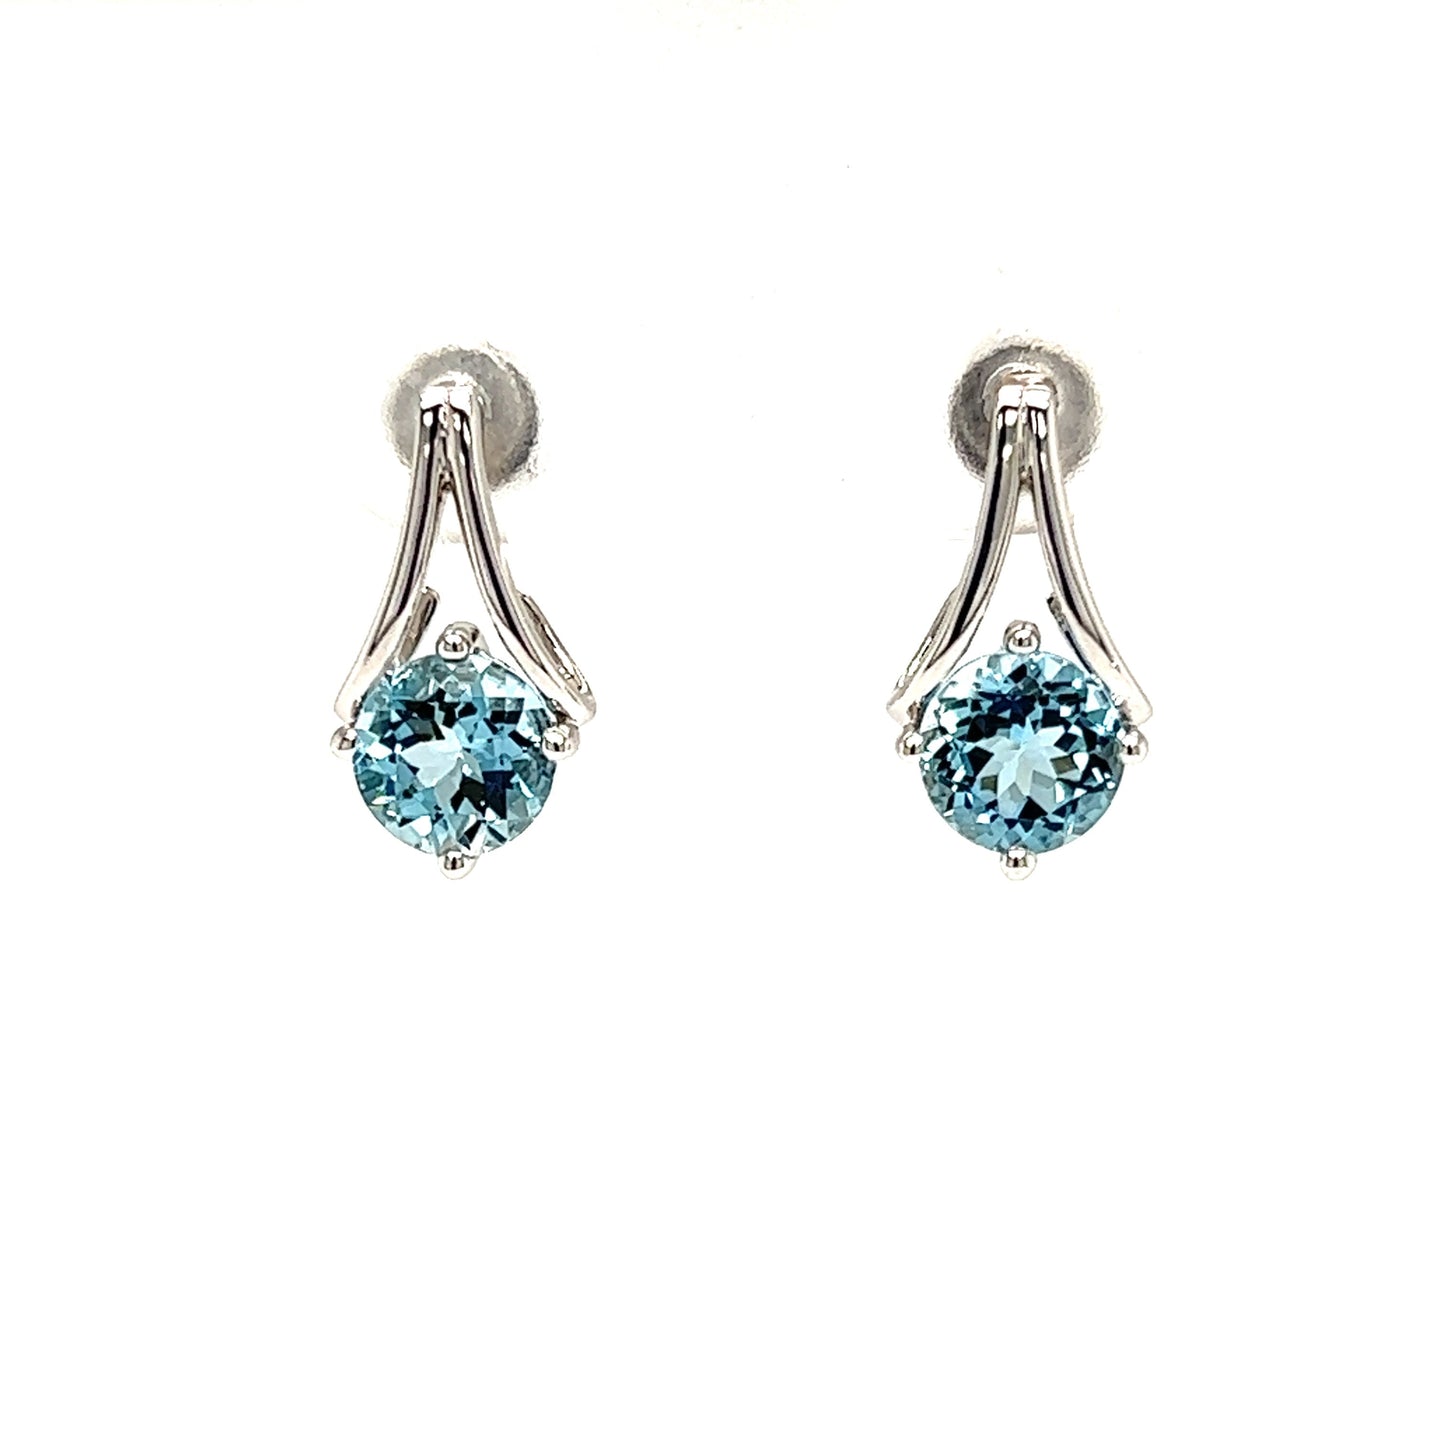 Round Aquamarine Earrings with V-Shaped Bars in 14K White Gold Hanging Front View